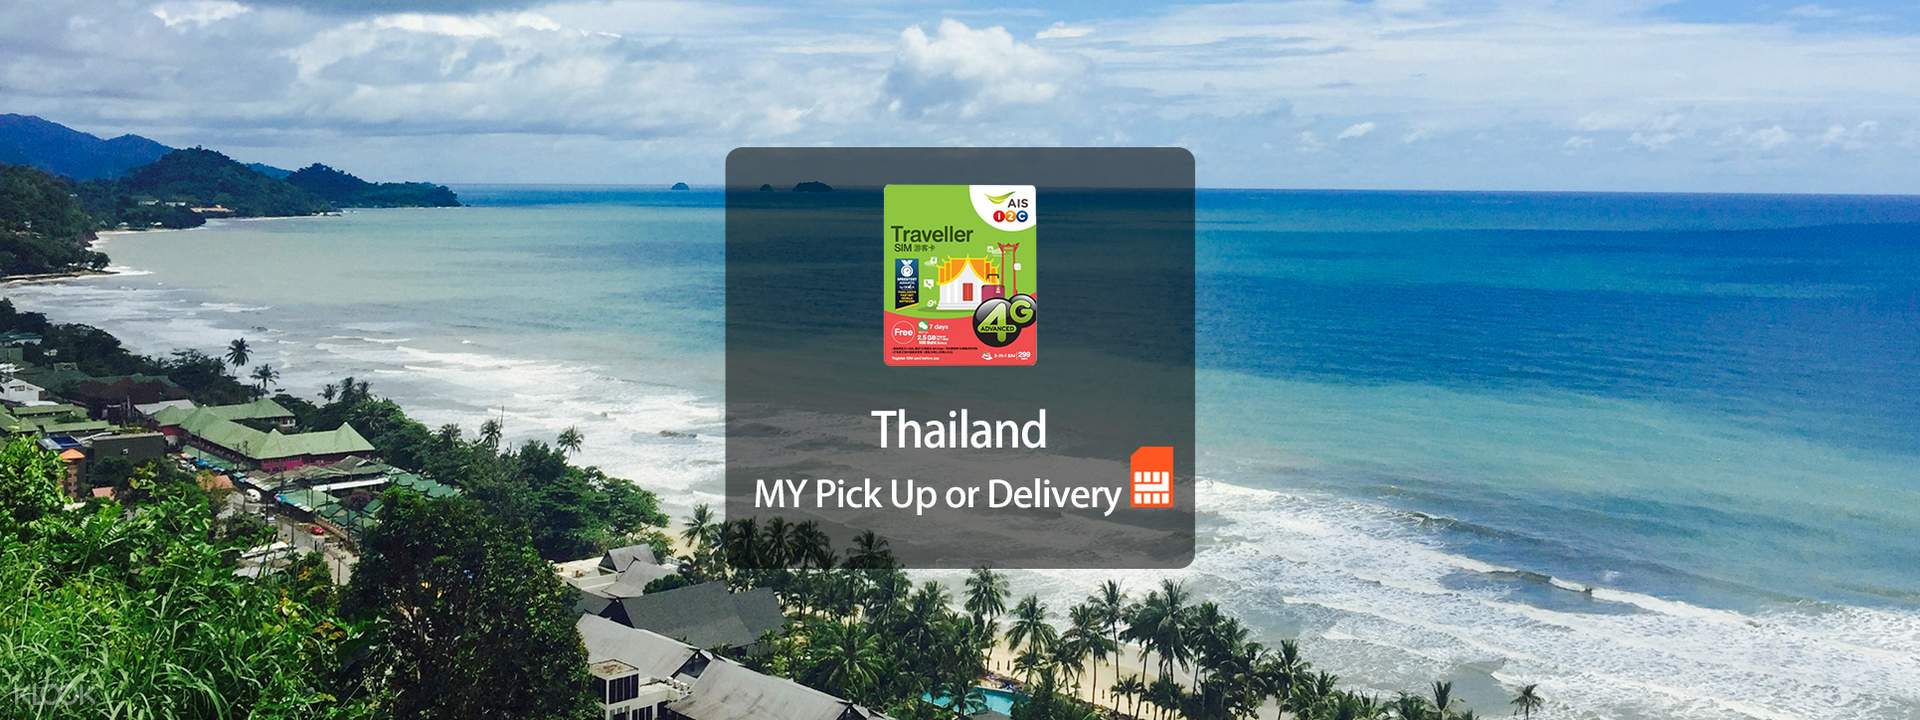 4G SIM Card (MY Pick Up/Delivery) for Thailand, Koh Chang ...